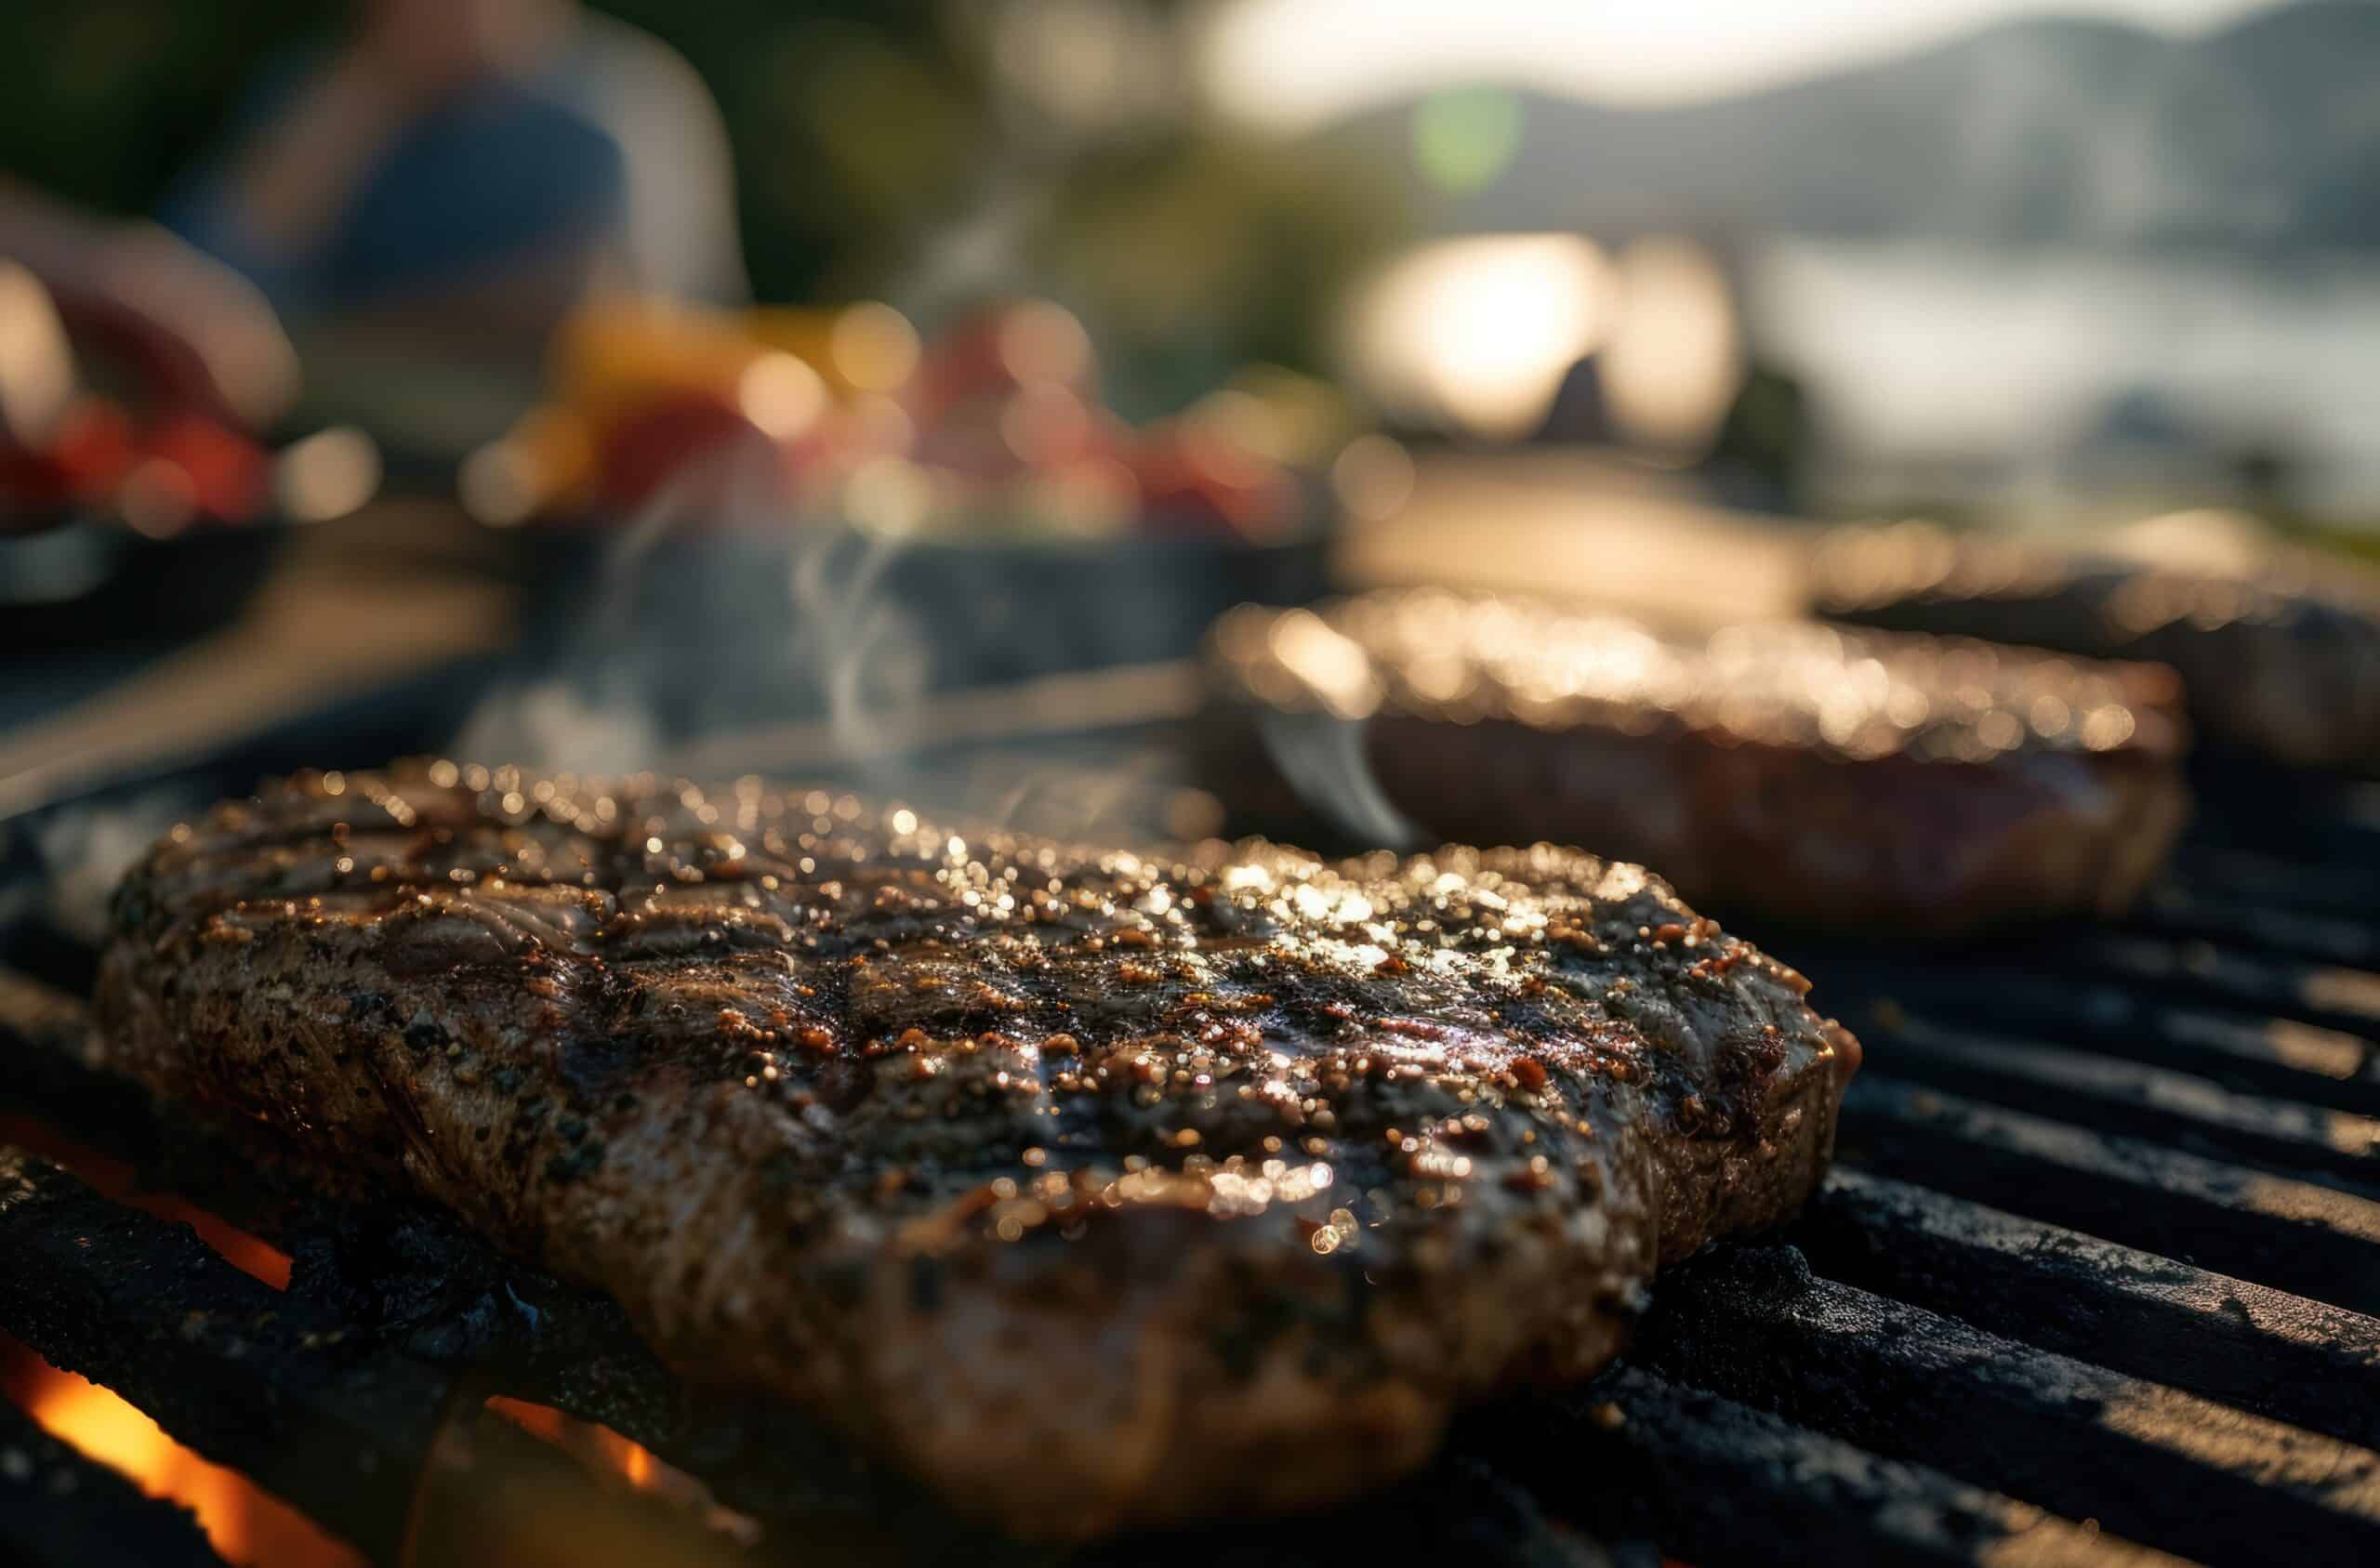 www.appr.com : What Temperature To Grill Steak On A Gas Grill?